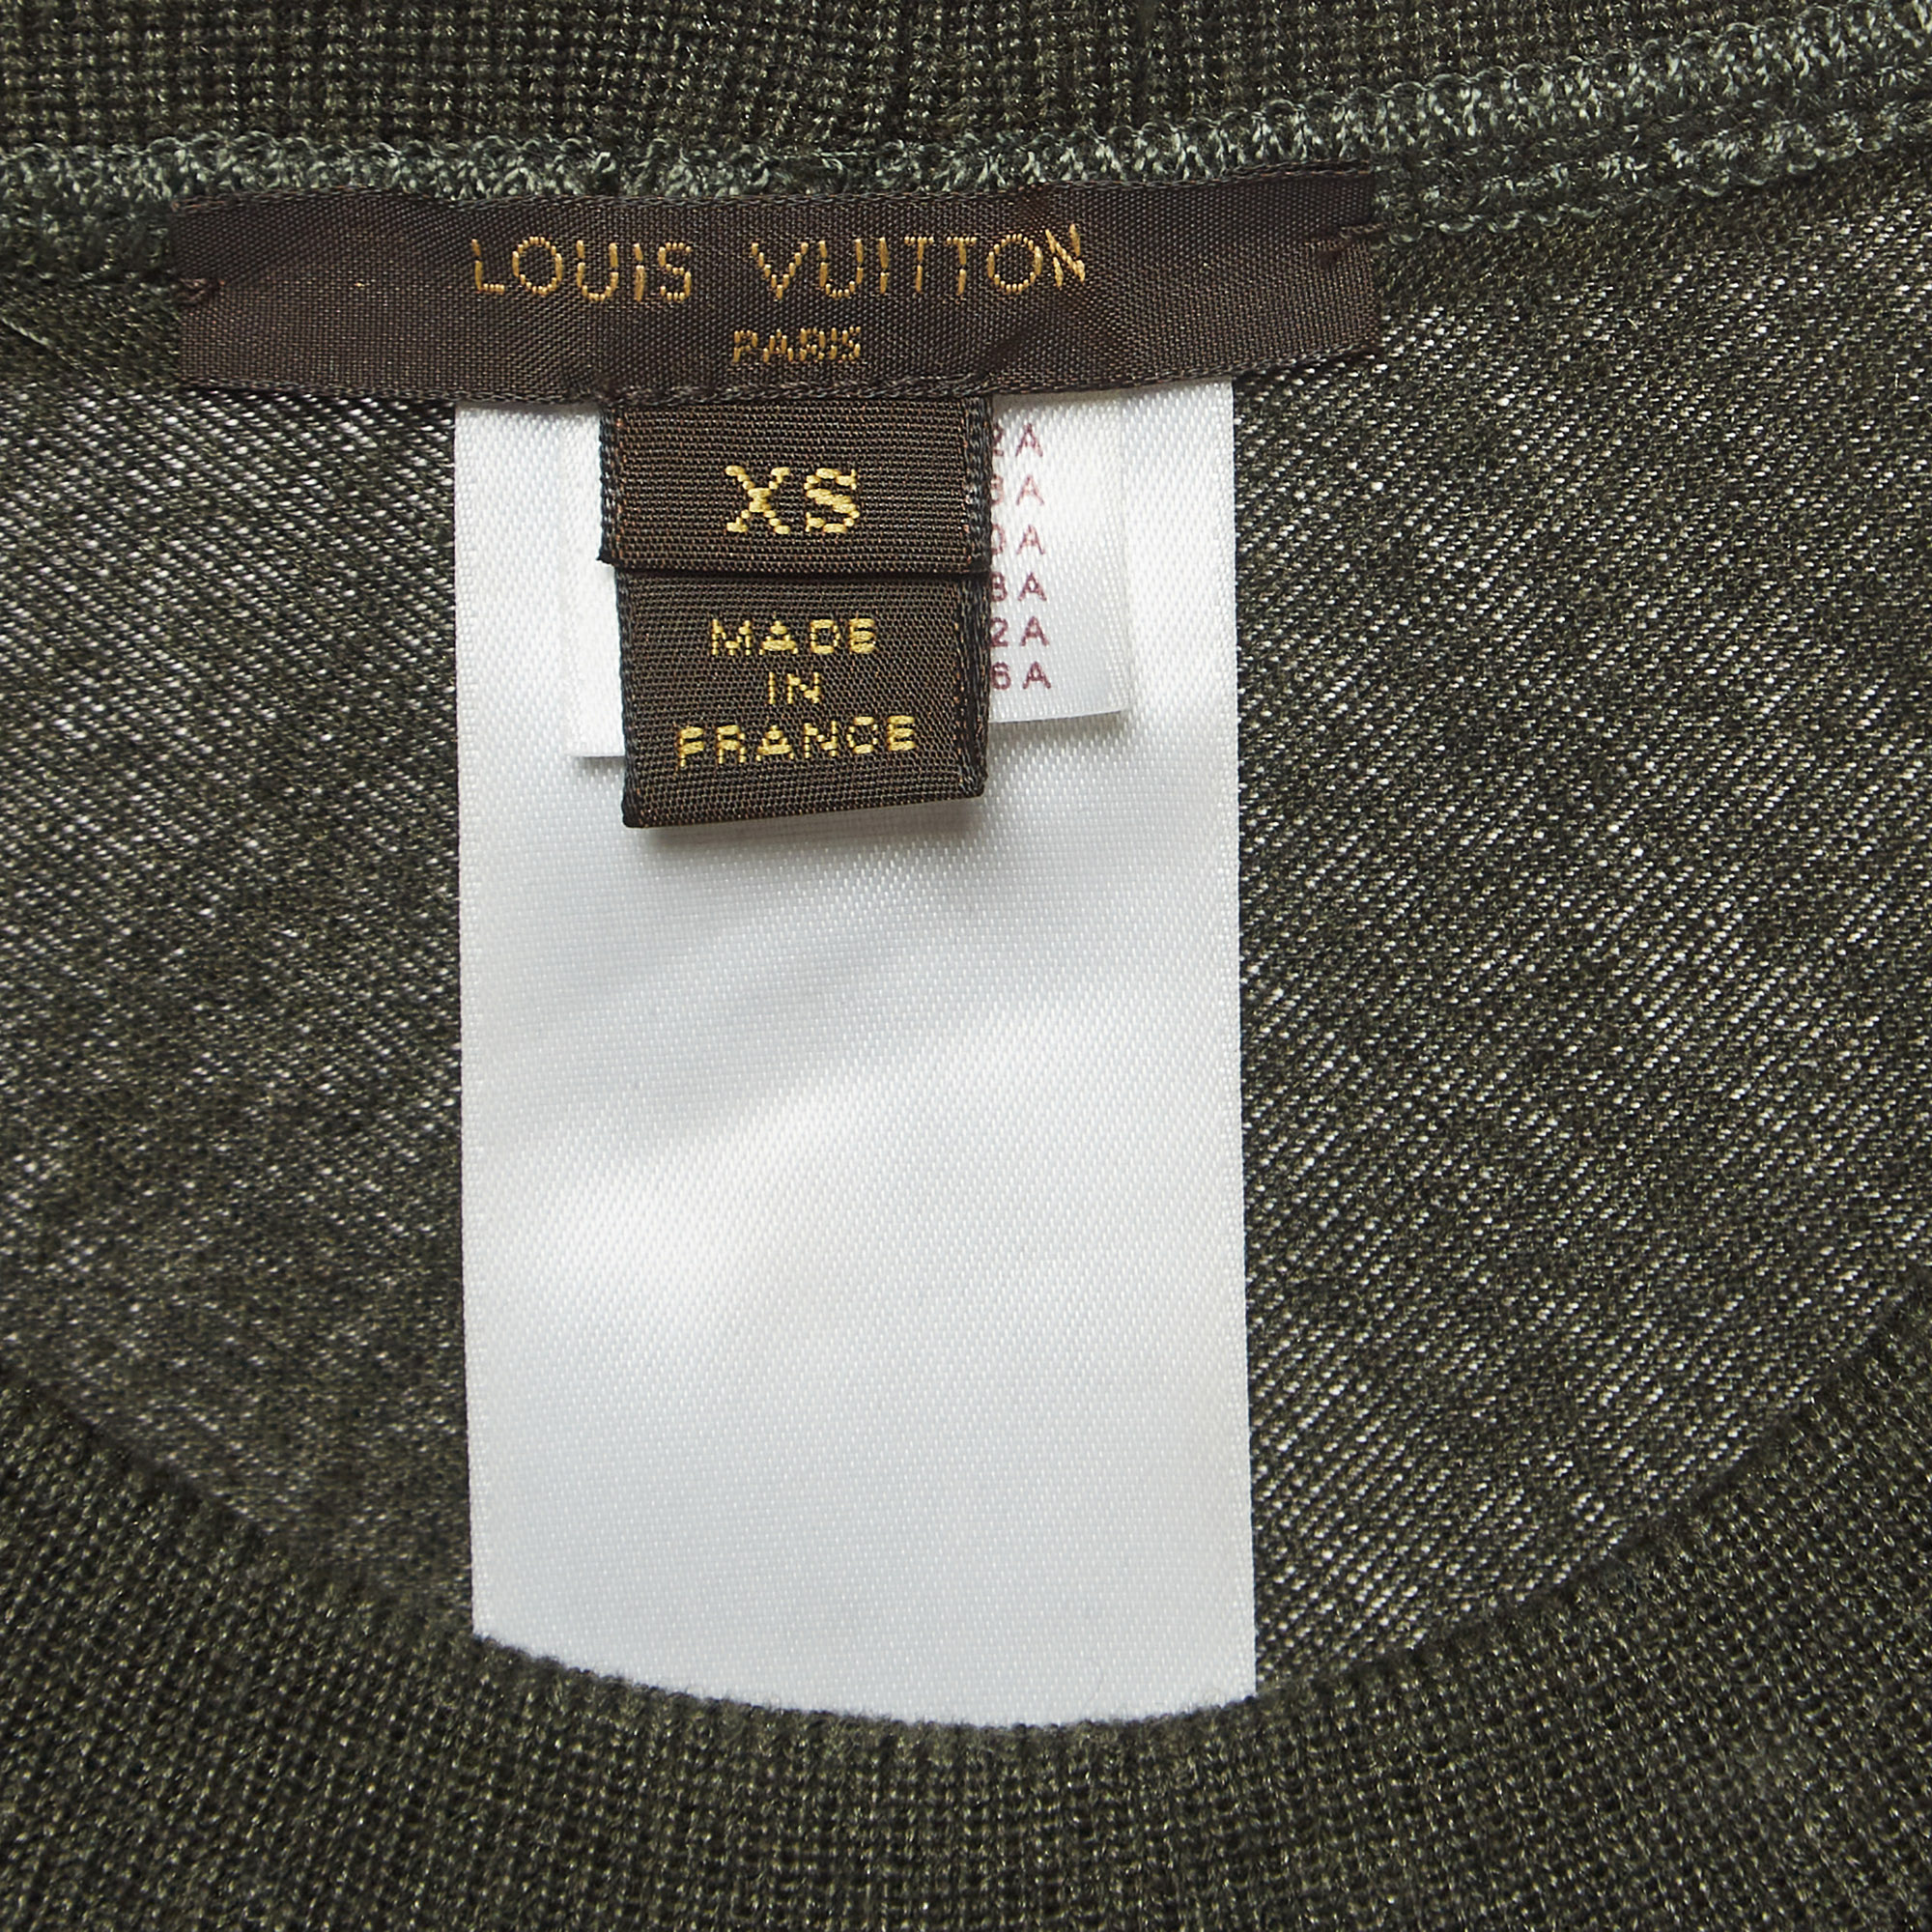 Louis Vuitton Military Green Logo Embossed Cashmere & Silk Knit Top XS